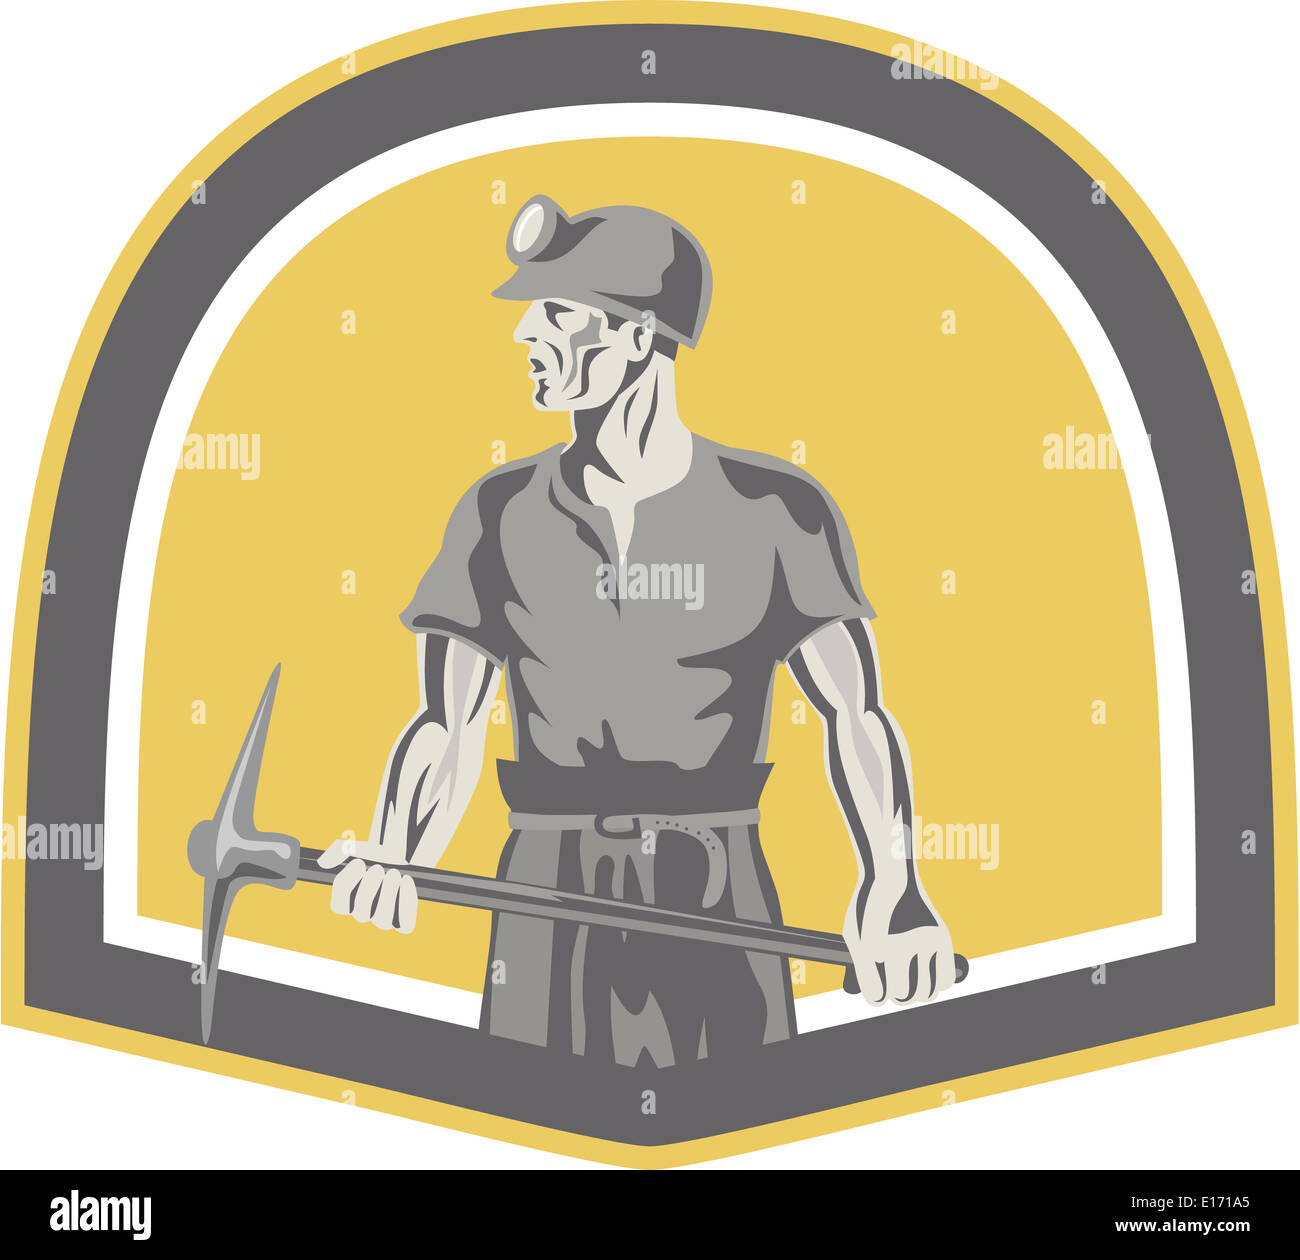 Illustration of a coal miner wearing hardhat looking to the side holding a pick axe set inside shield crest done in retro style. Stock Photo